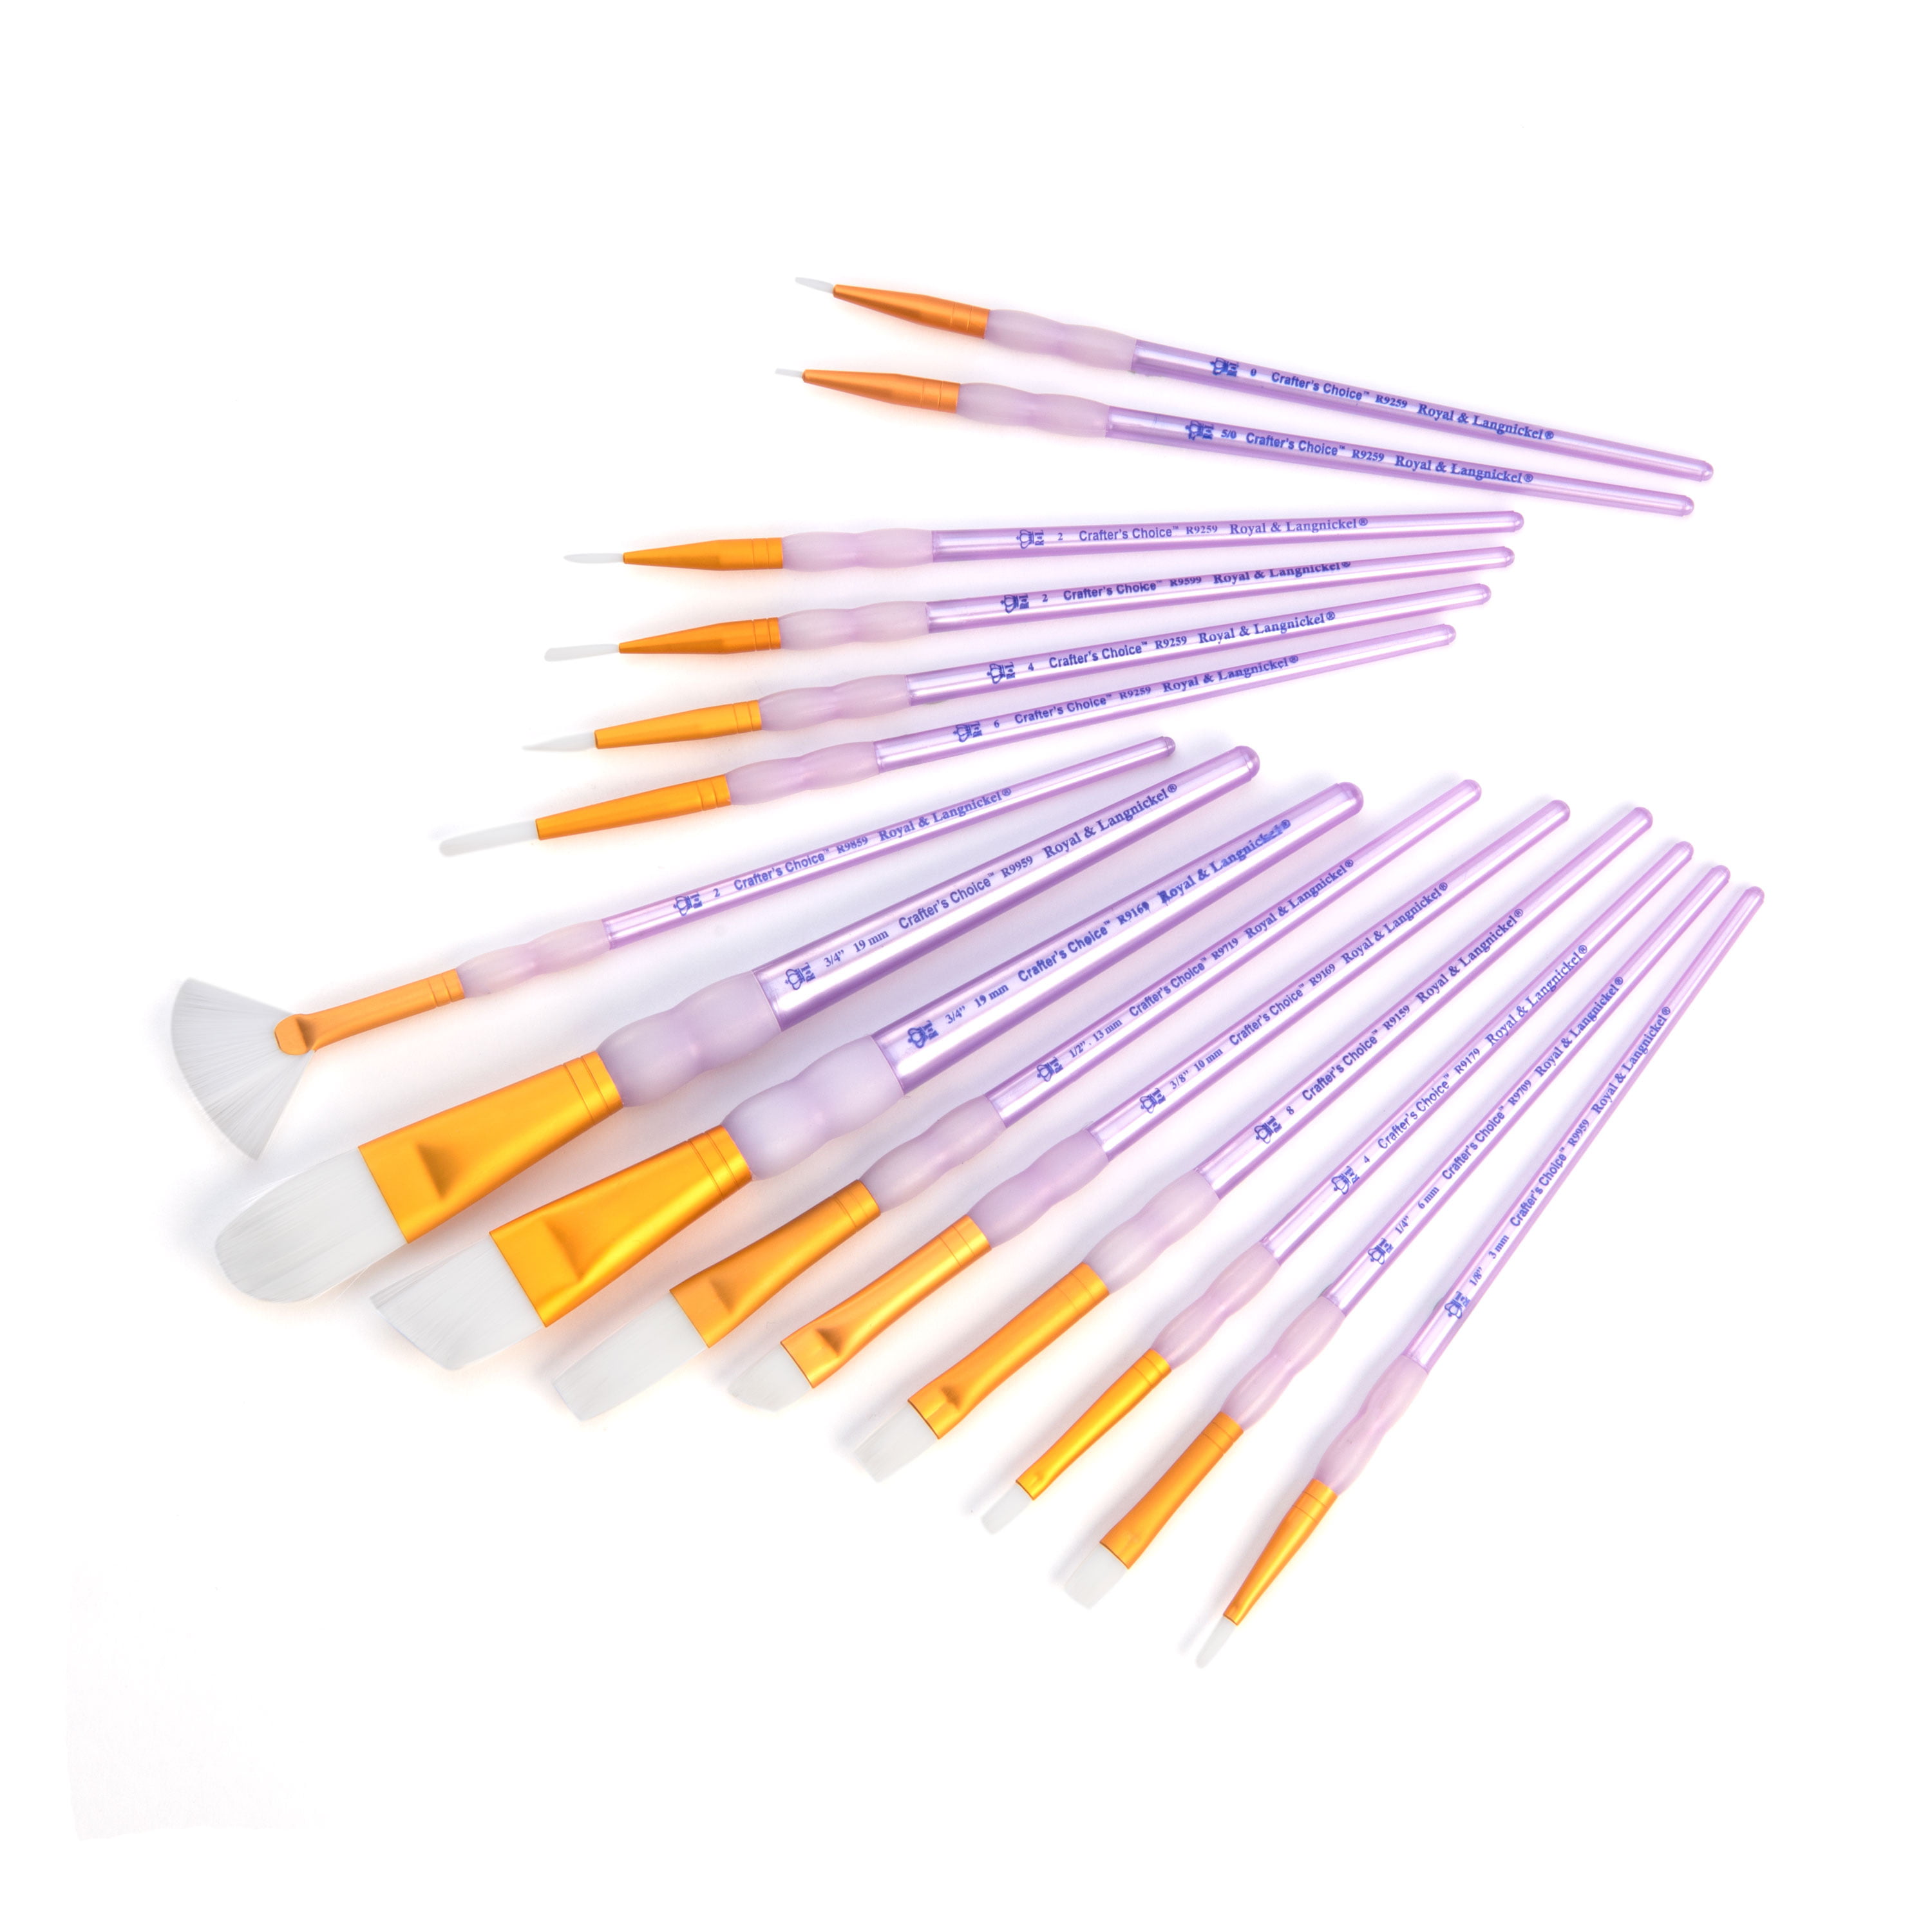 Royal Crafter's Choice Foam Brushes, 3 ct - Kroger